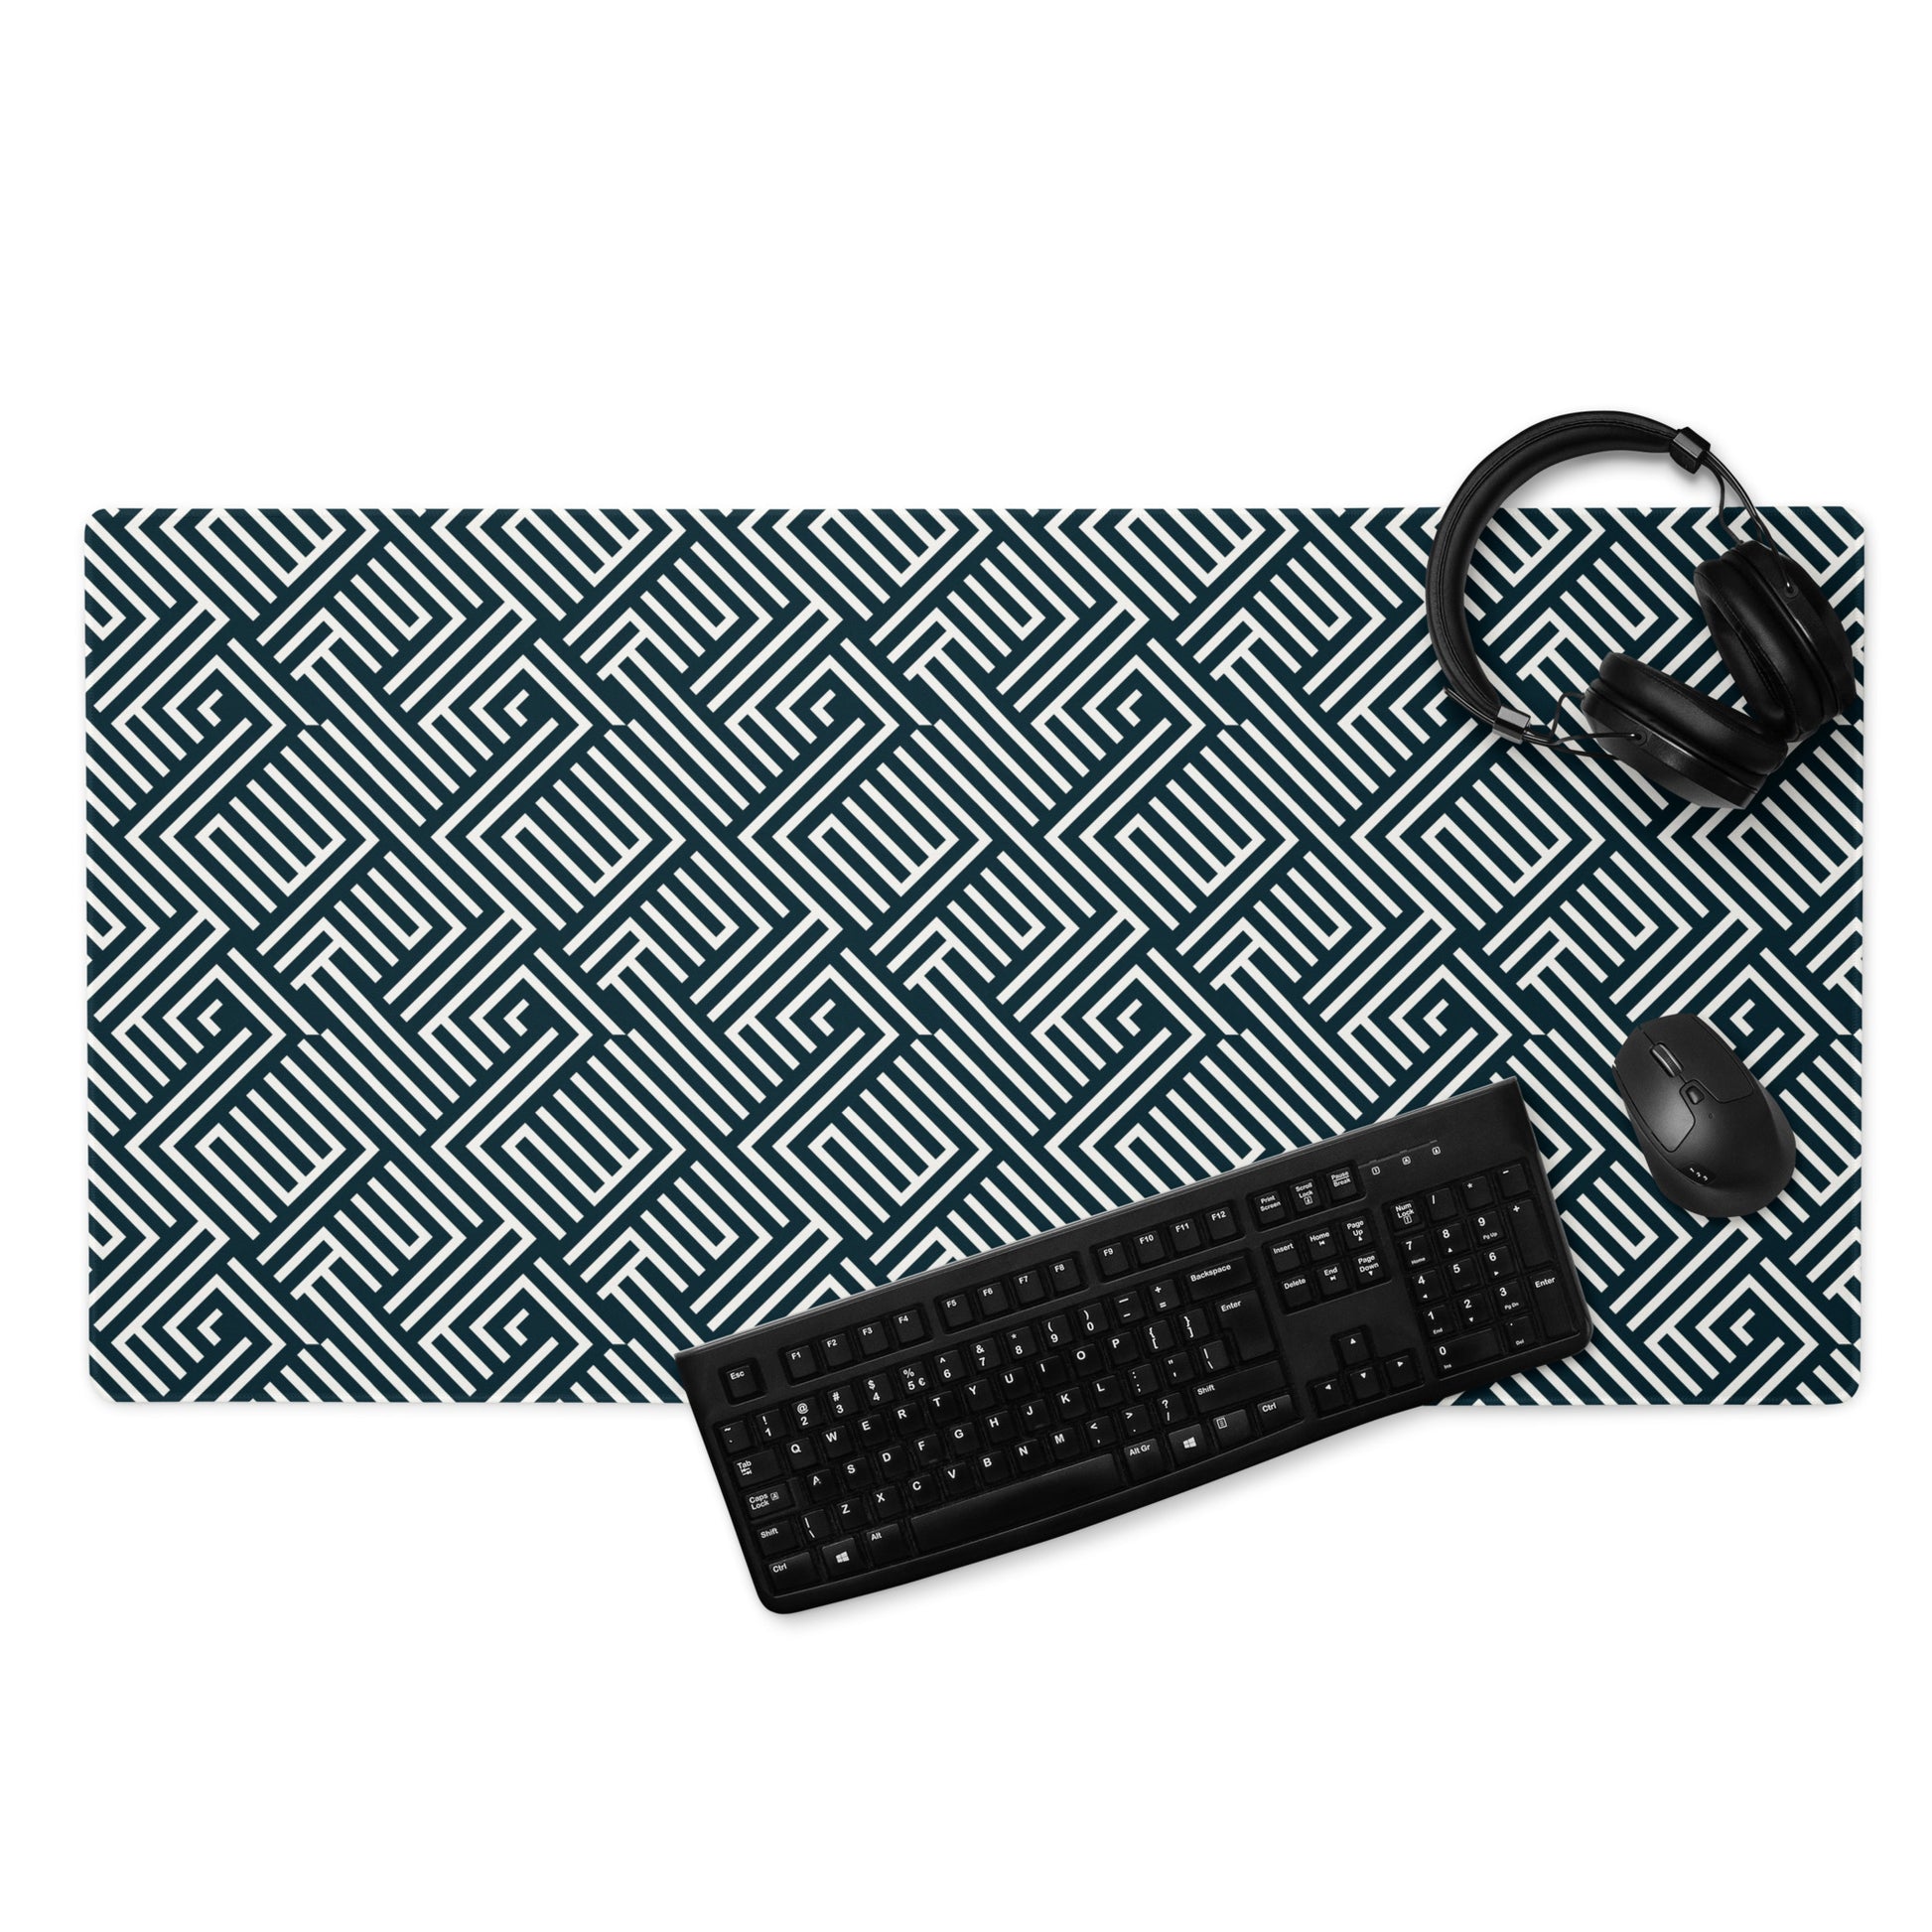 A 36" x 18" gaming desk pad with white lines on a black background. A keyboard, mouse, and headphones sit on it.